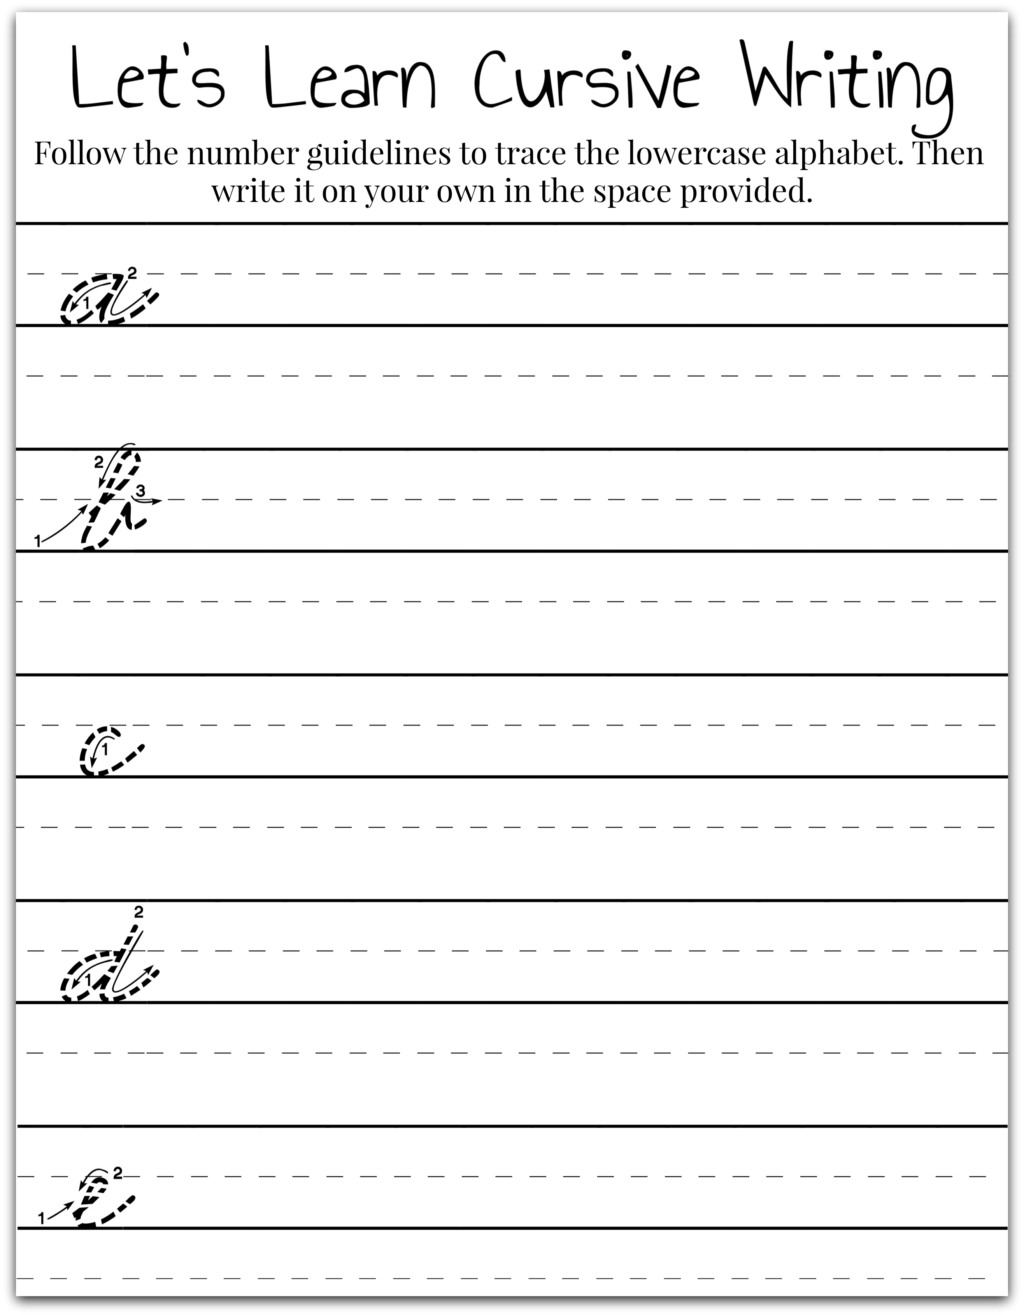 Worksheet ~ Learning Cursive Writing Lowercase Letters